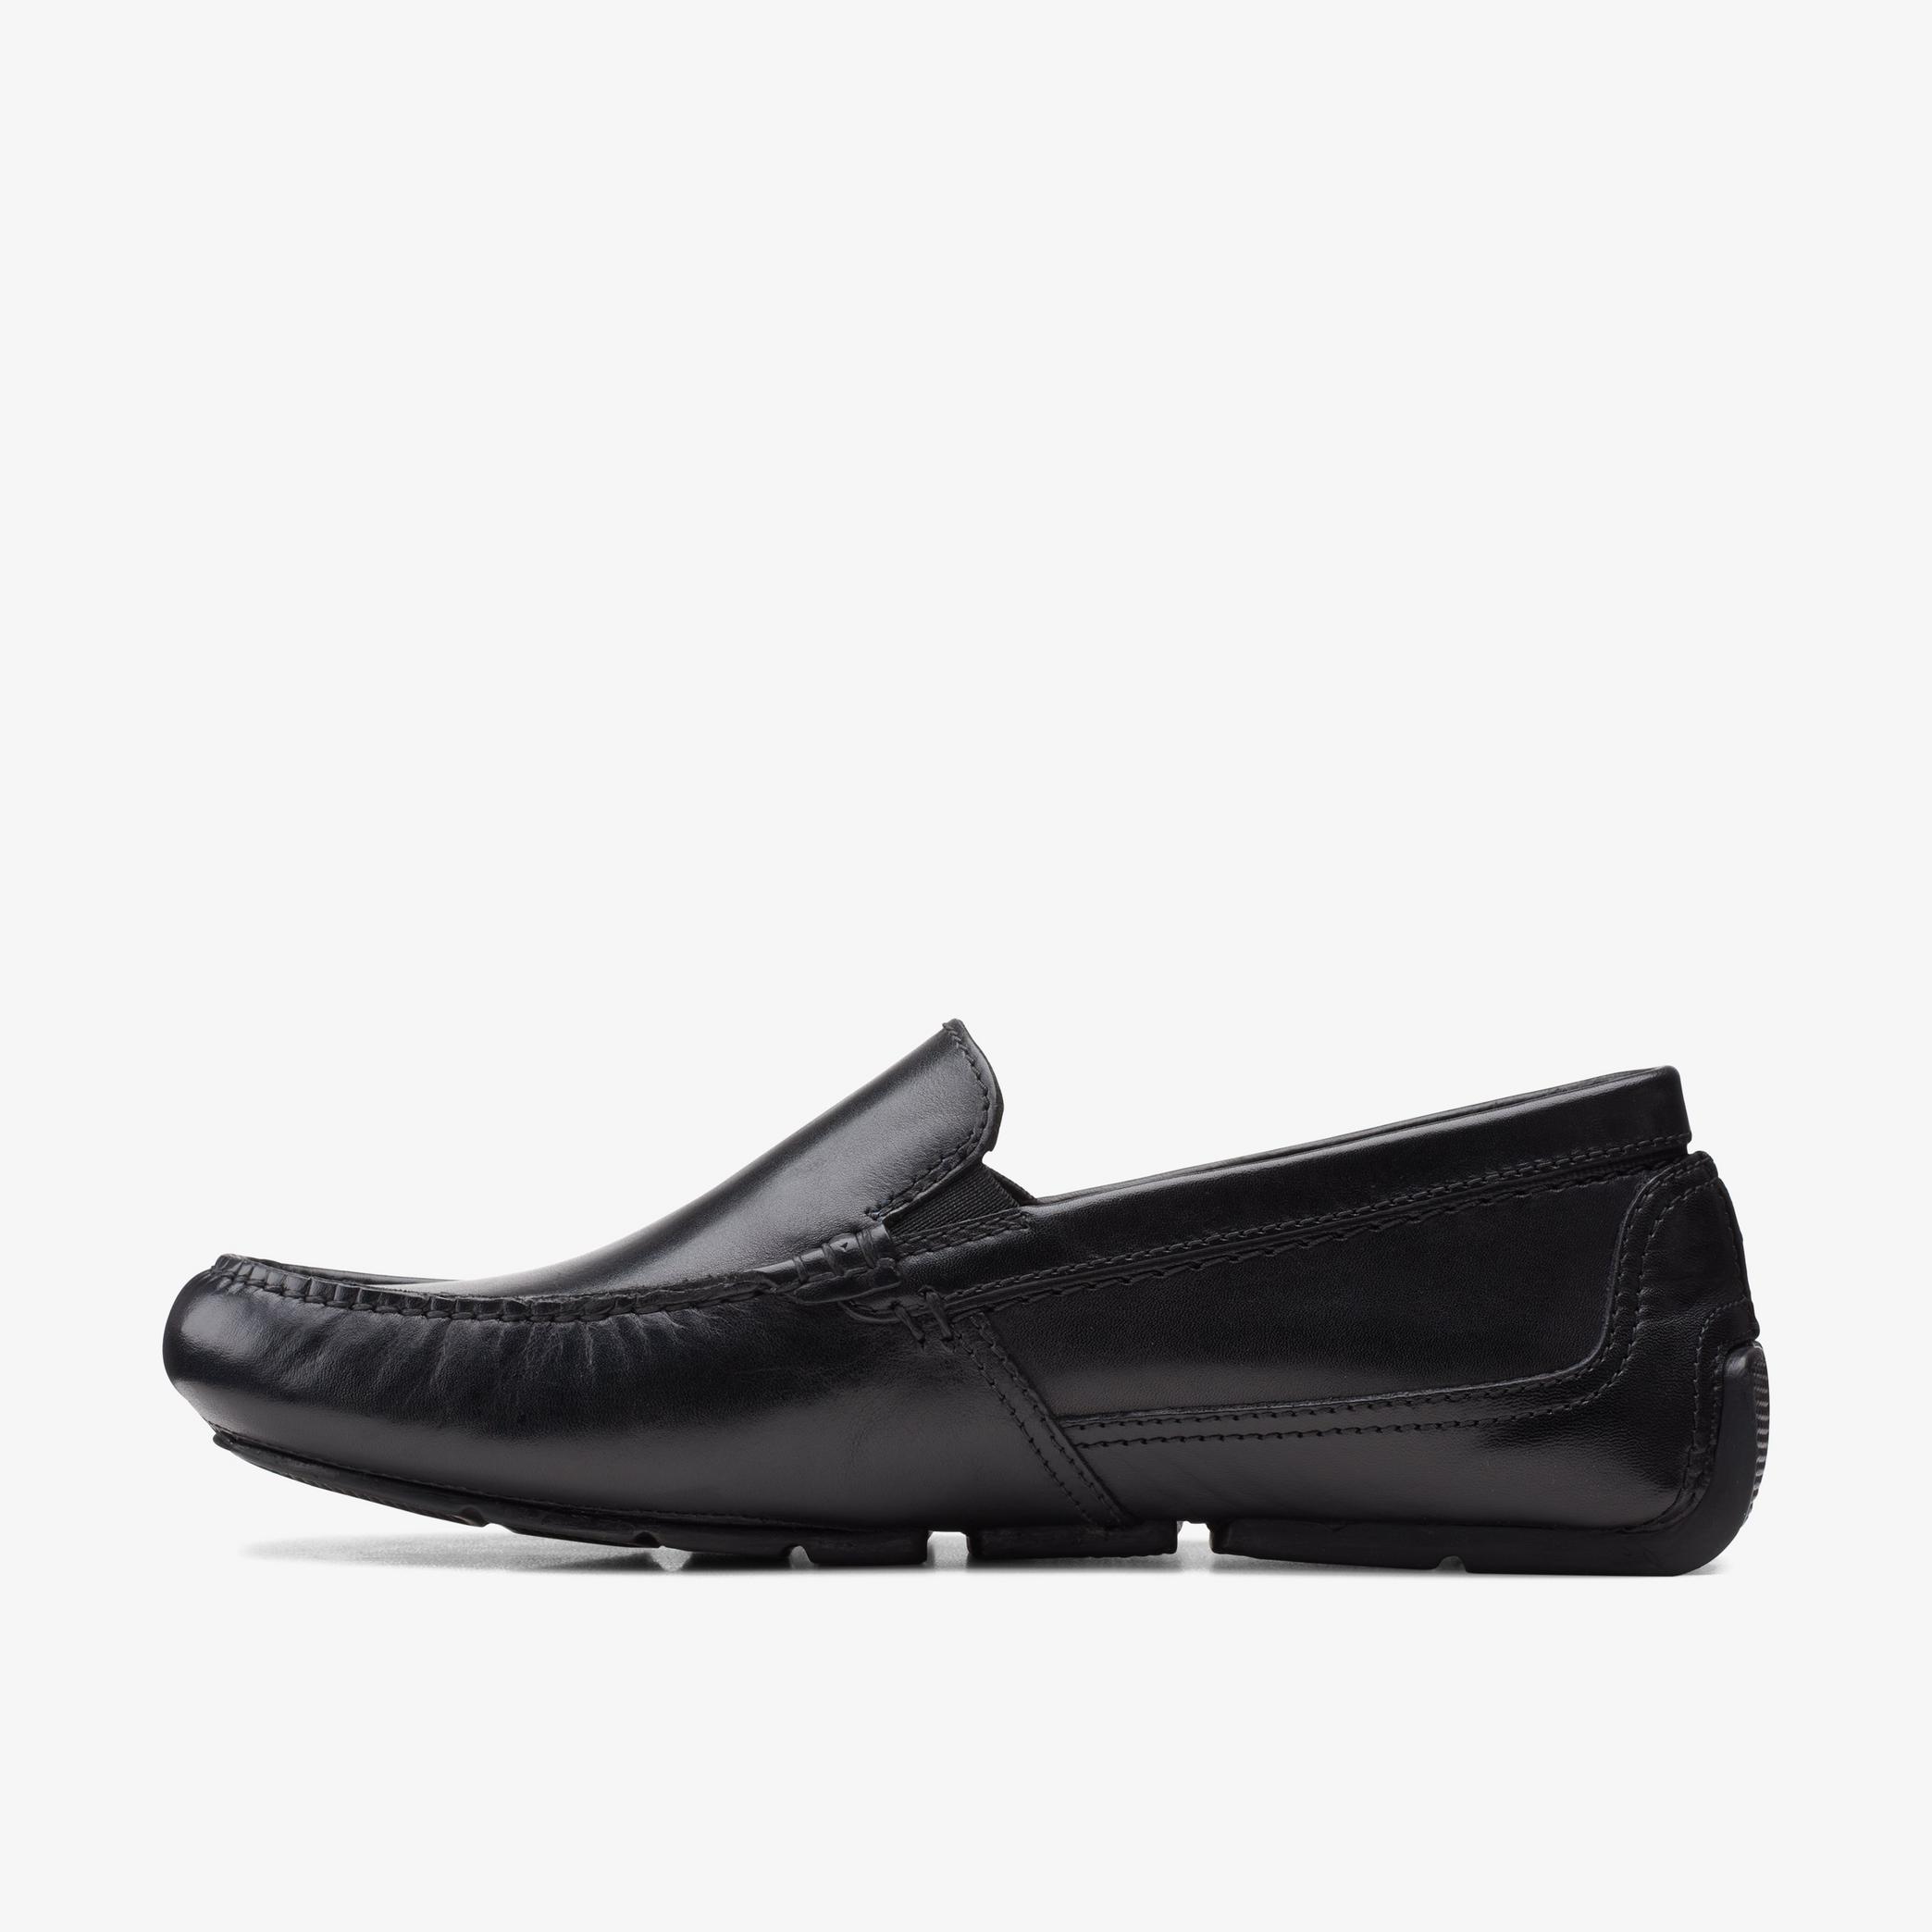 Markman Plain Black Leather Loafers, view 2 of 5